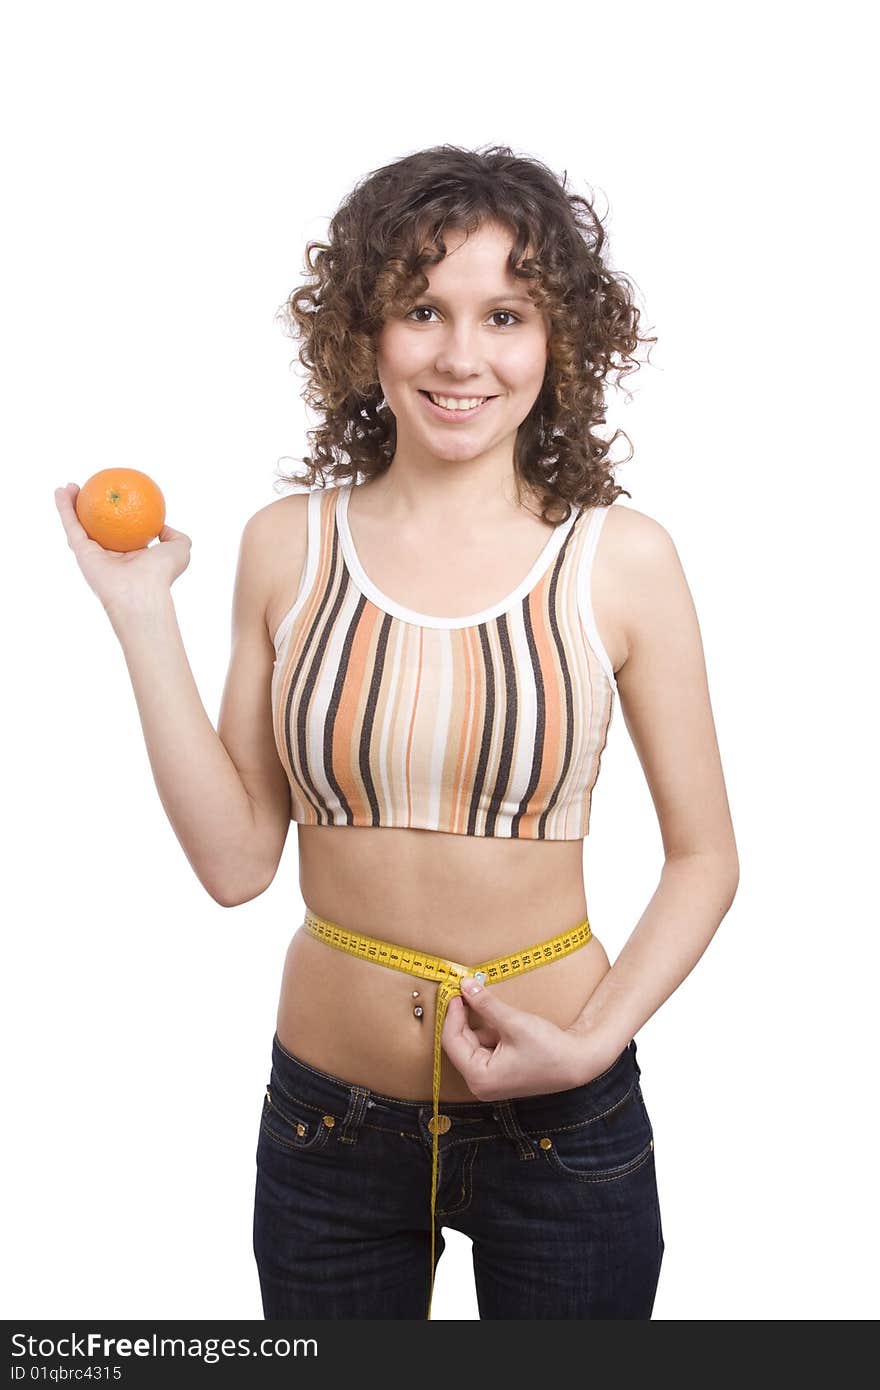 Beautiful fit woman with measure tape isolated over white. Weight loss and healthy lifestyle concept. Girl measuring waist with a tape measure. Isolated. Woman hold orange in hand. Waist is 65.5 centimeters. Beautiful fit woman with measure tape isolated over white. Weight loss and healthy lifestyle concept. Girl measuring waist with a tape measure. Isolated. Woman hold orange in hand. Waist is 65.5 centimeters.